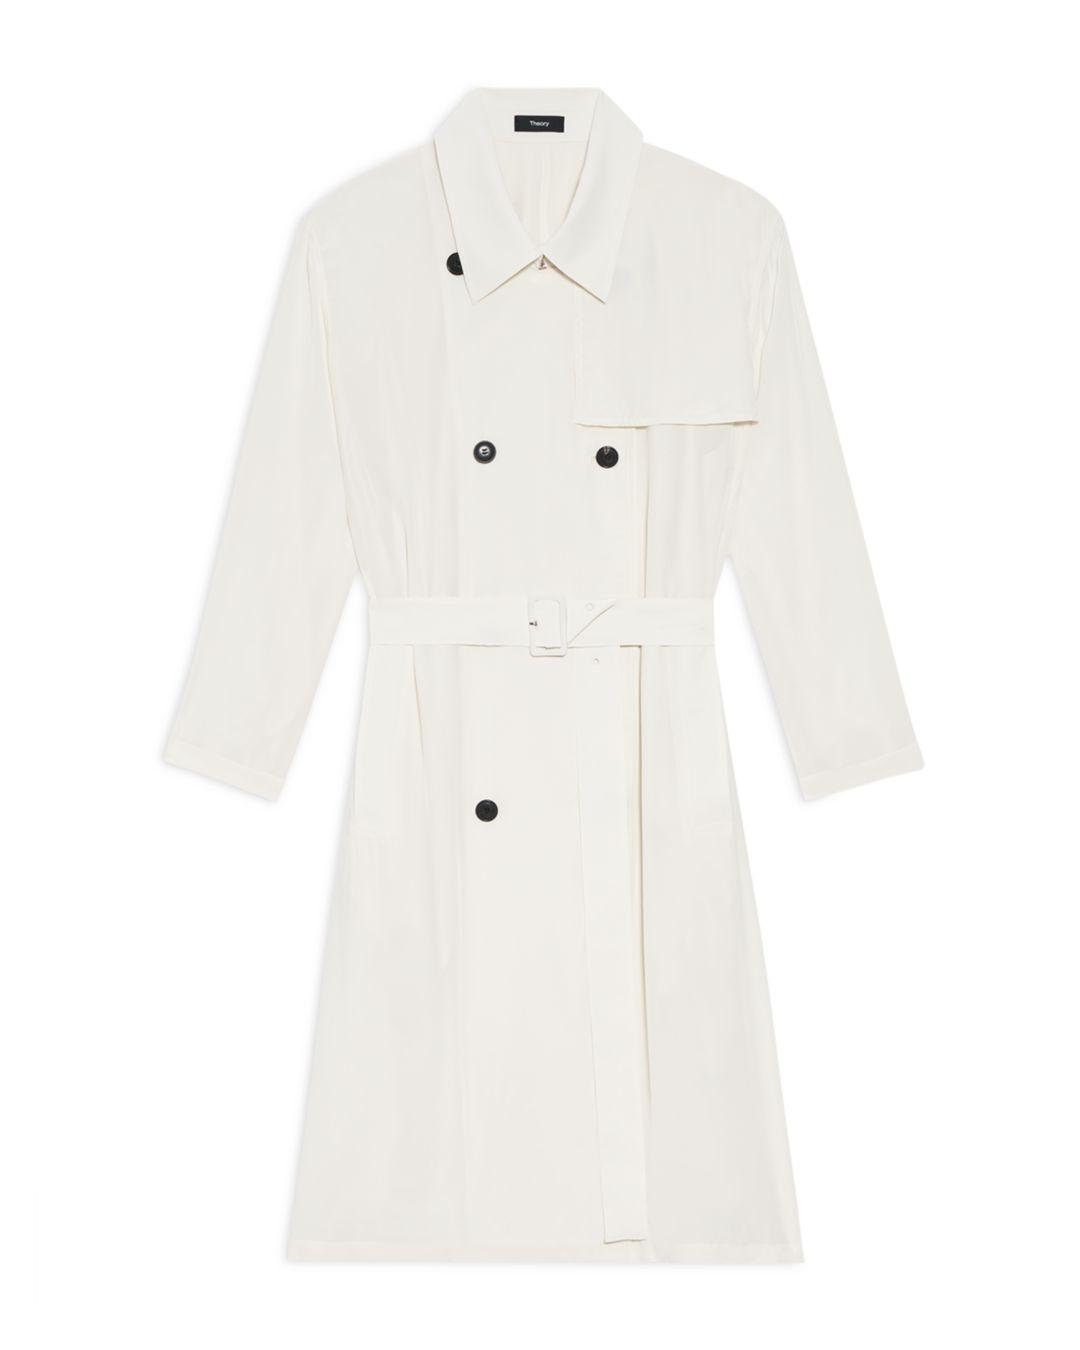 Theory Double Breasted Trench Jacket in White | Lyst